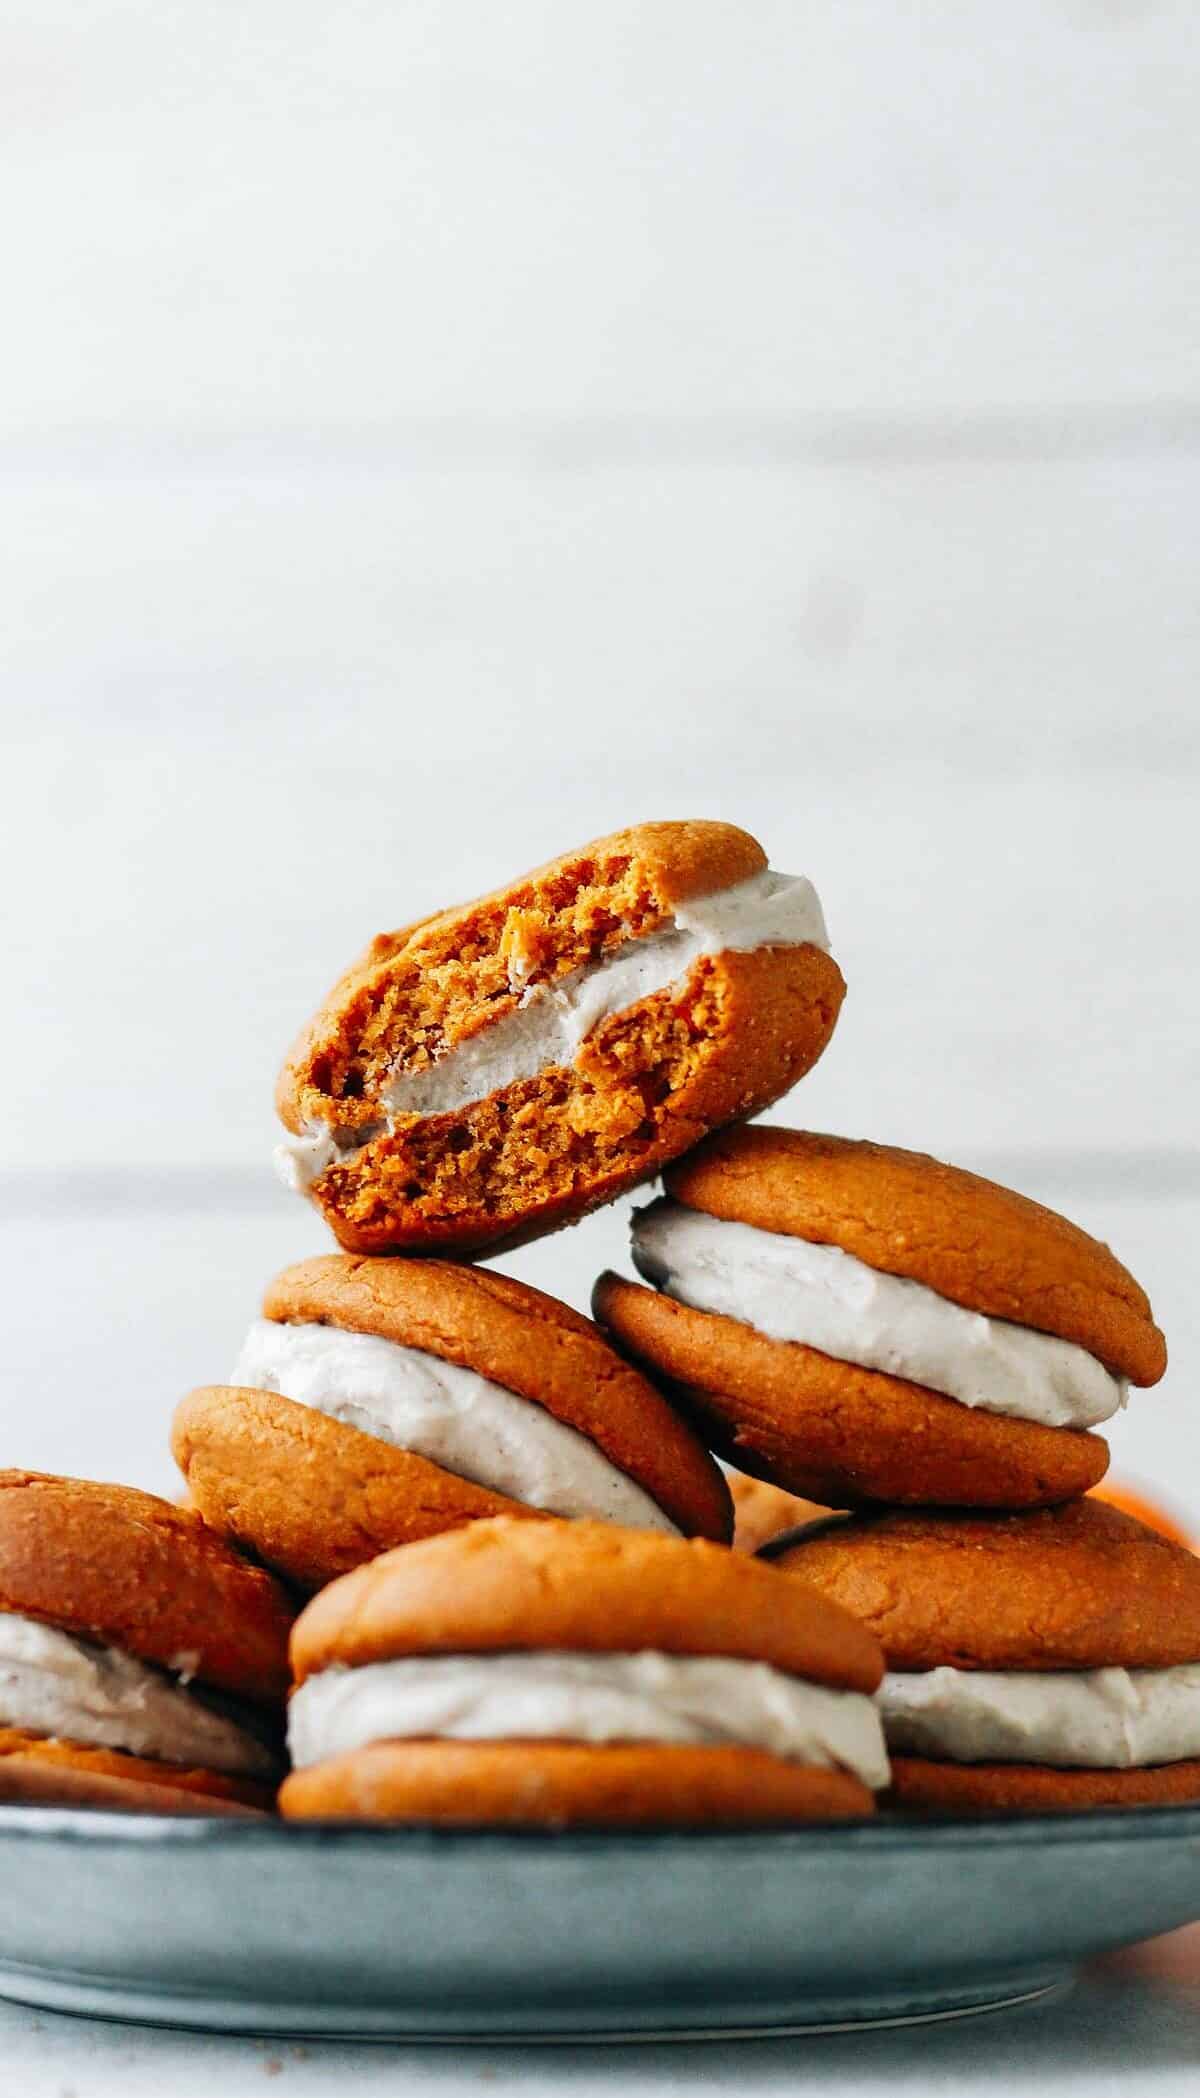  Soft and fluffy vegan pumpkin whoopie pies with a creamy filling.